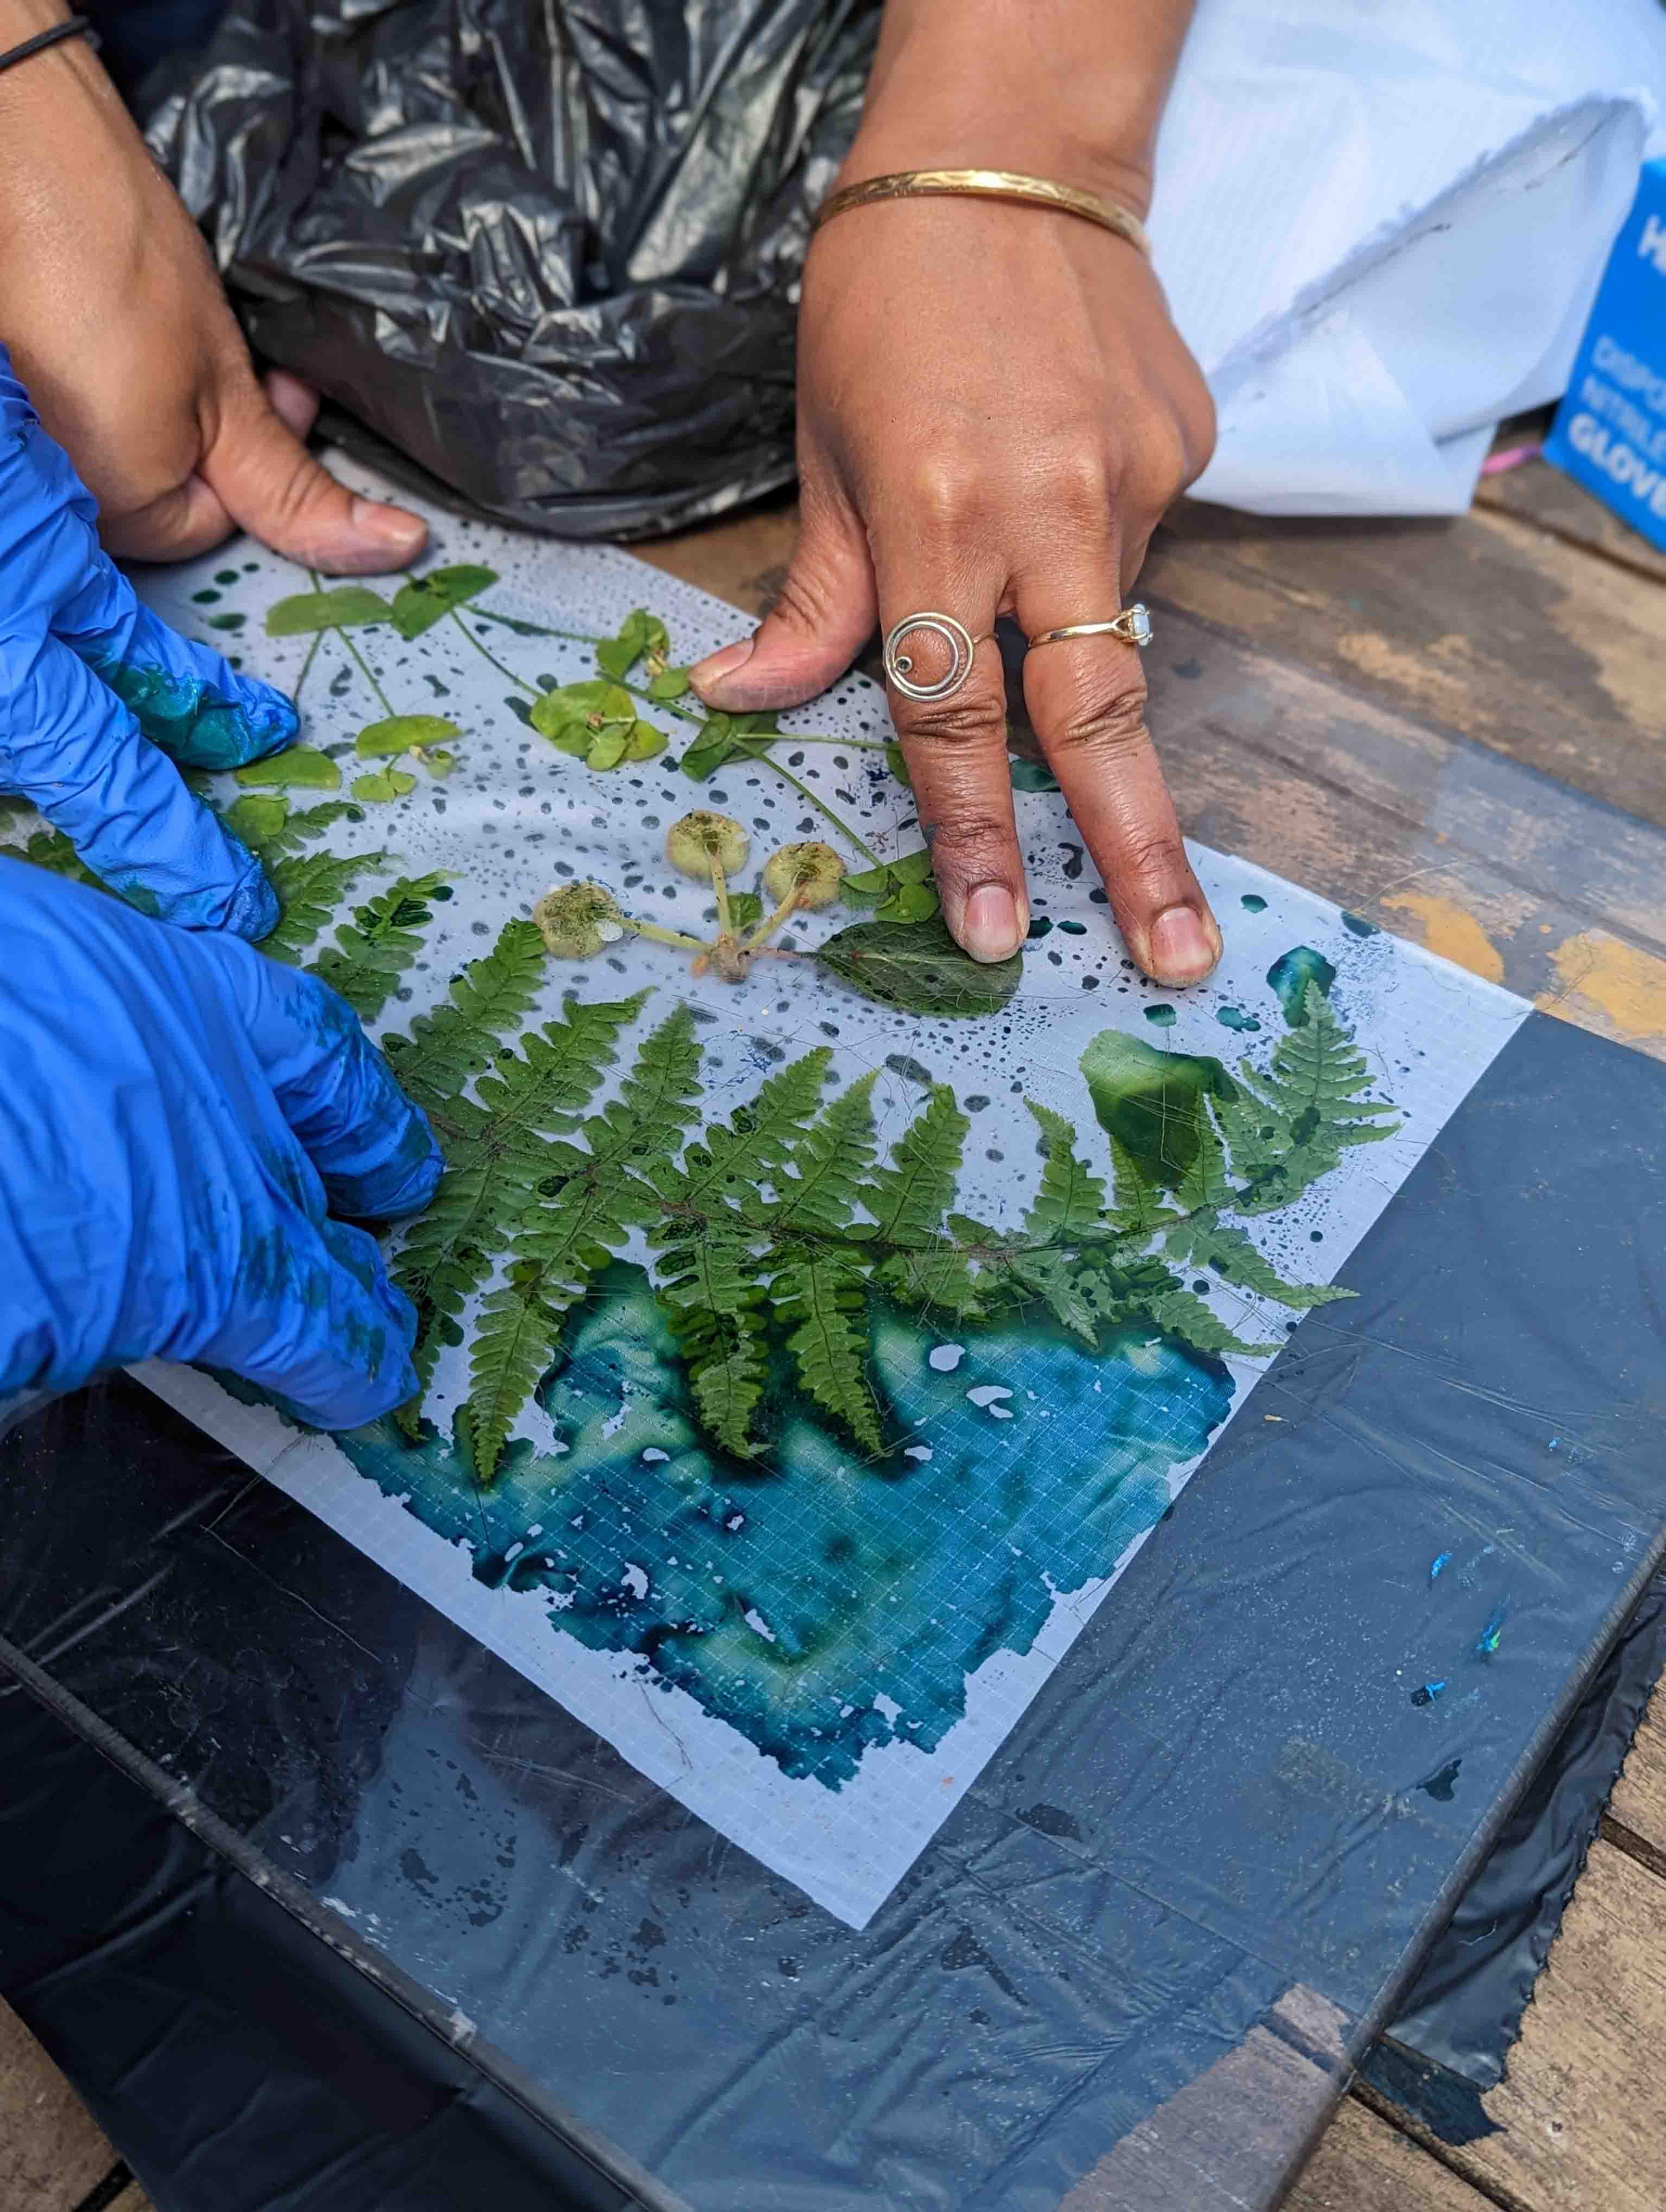 Two pairs of hands applying fearn leaves on a sheet of paper with a blue pigment.